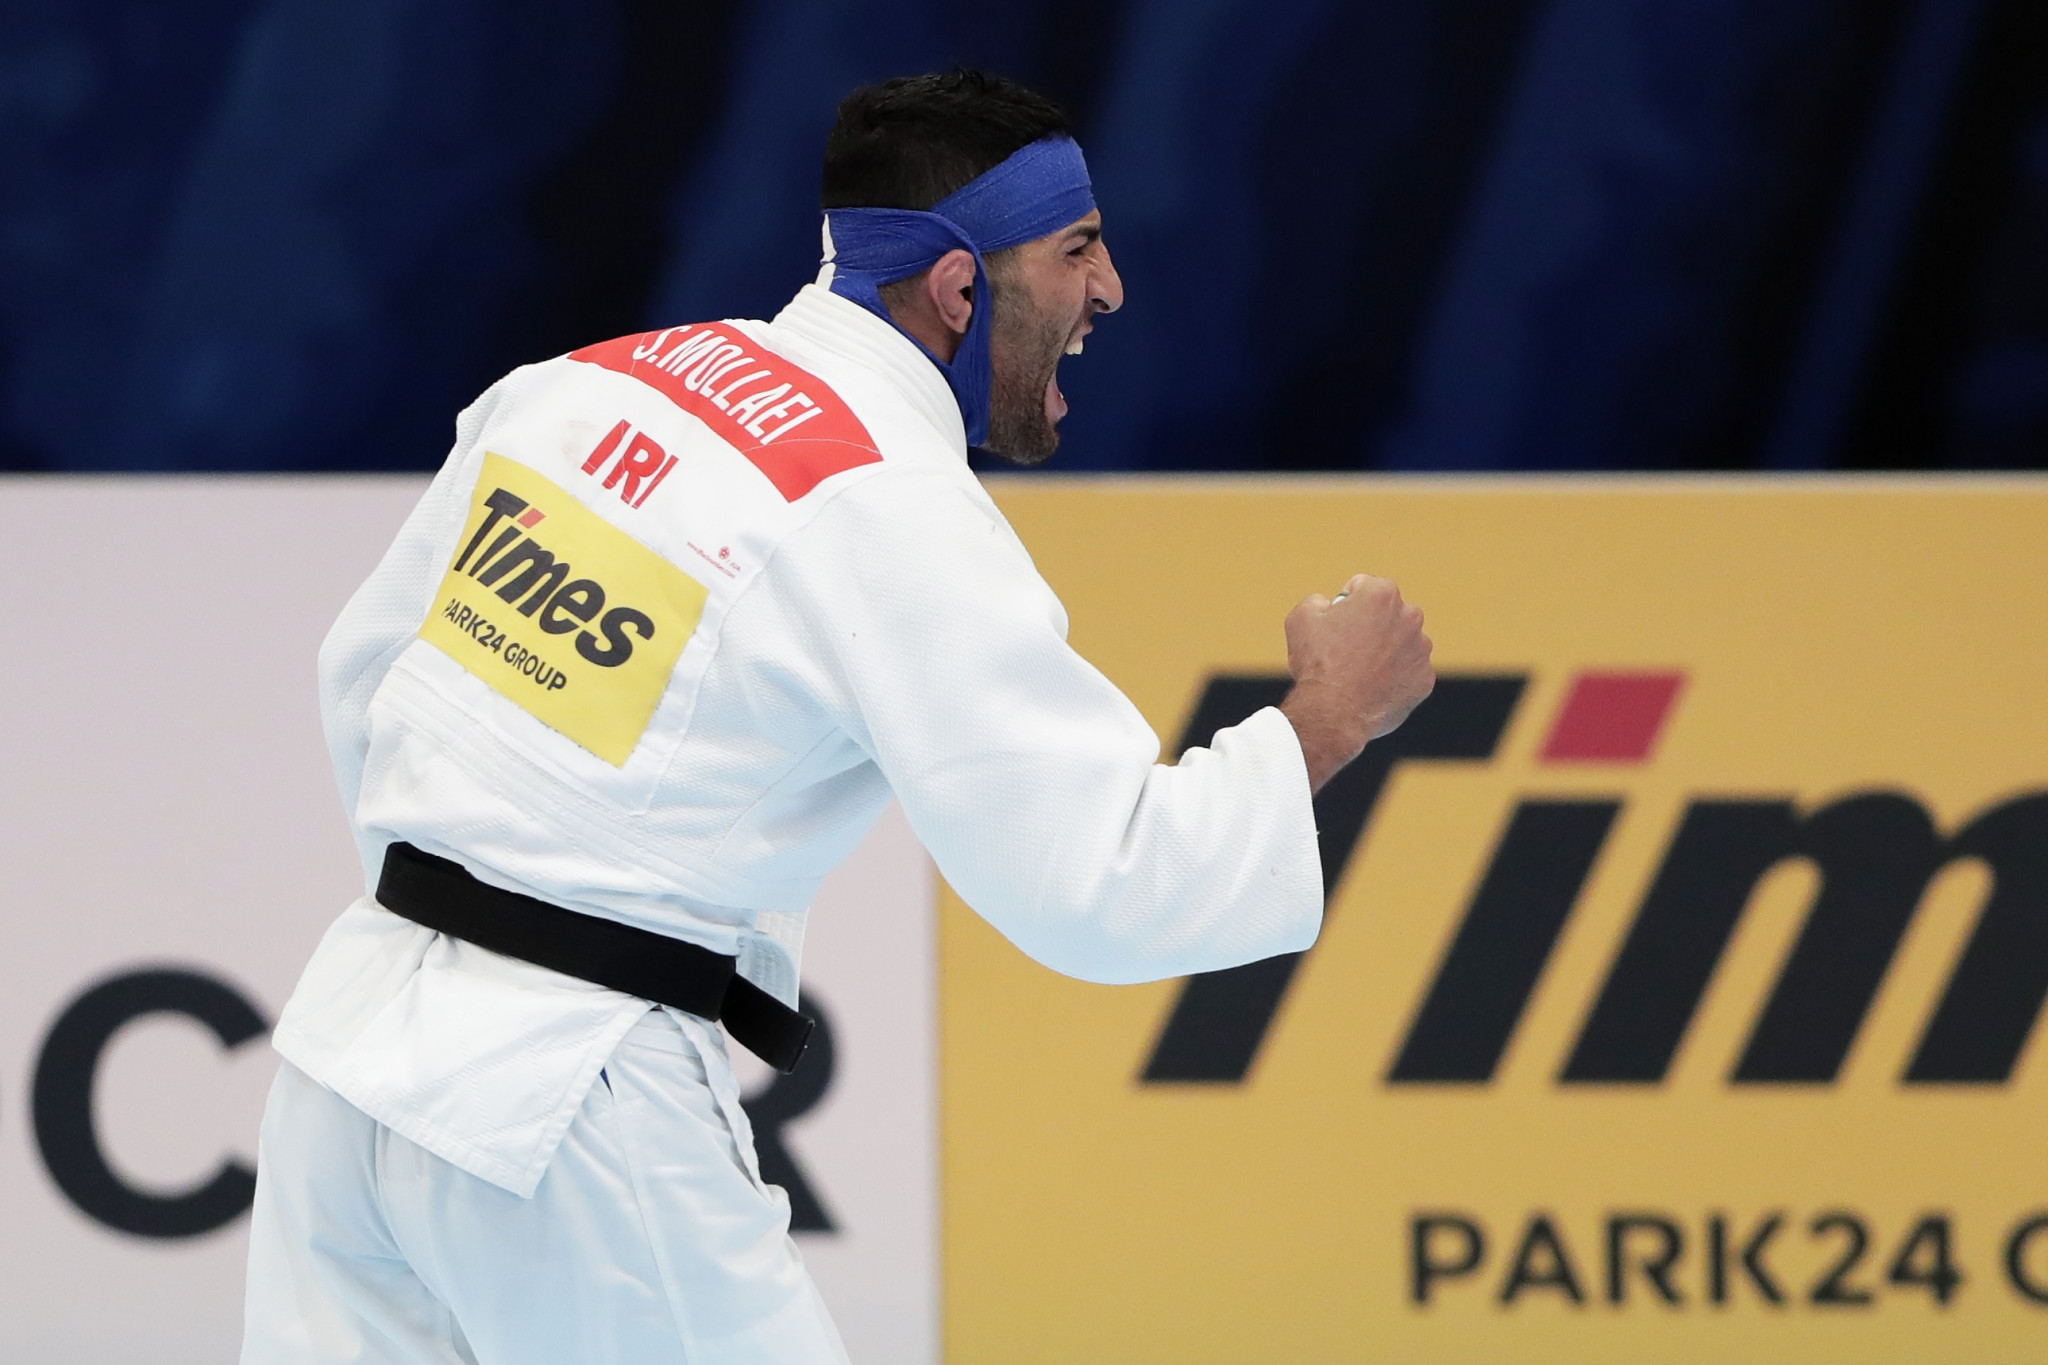 Iran has been banned by the IJF since 2019 when Saeid Mollaei was ordered to pull out of the World Championships in Tokyo to avoid facing an Israeli opponent ©Getty Images